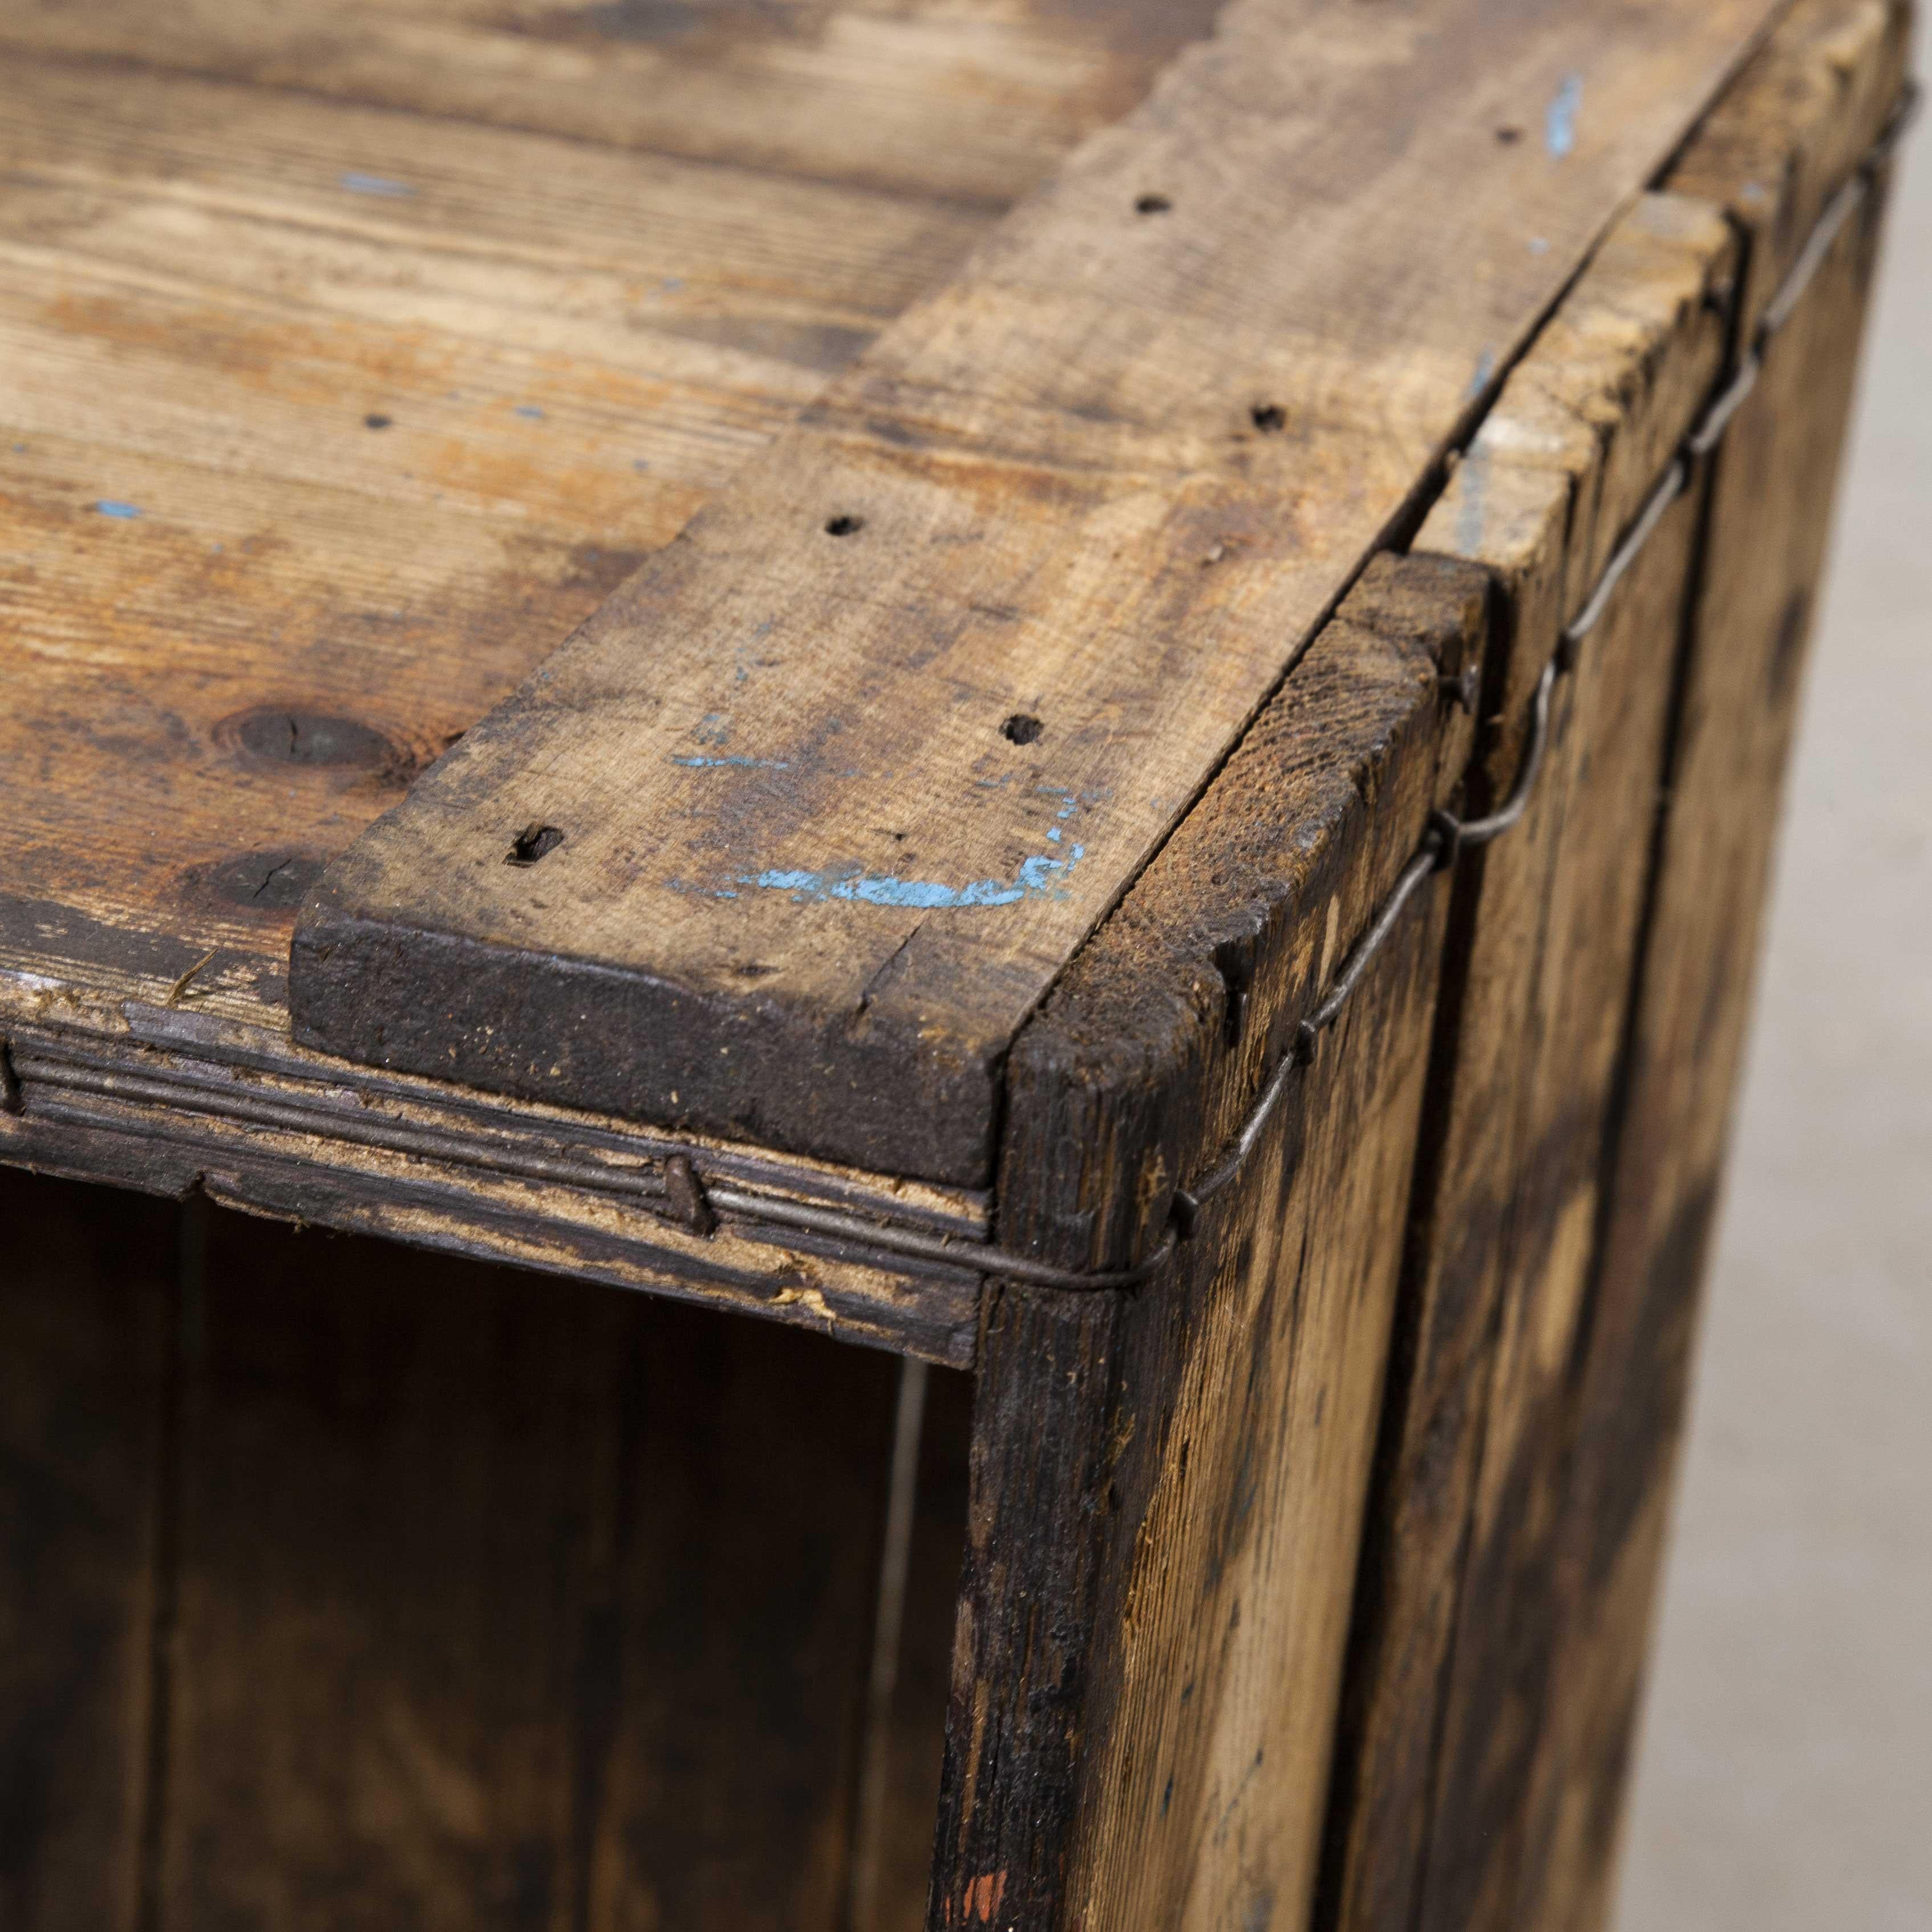 1890s large mill decorative pine crate (Crate 6)

1890s large mill decorative pine crate. We were recently contacted about the clearance of an old textile mill West of Leeds, the mill had stopped working as a textile mill many years ago and was